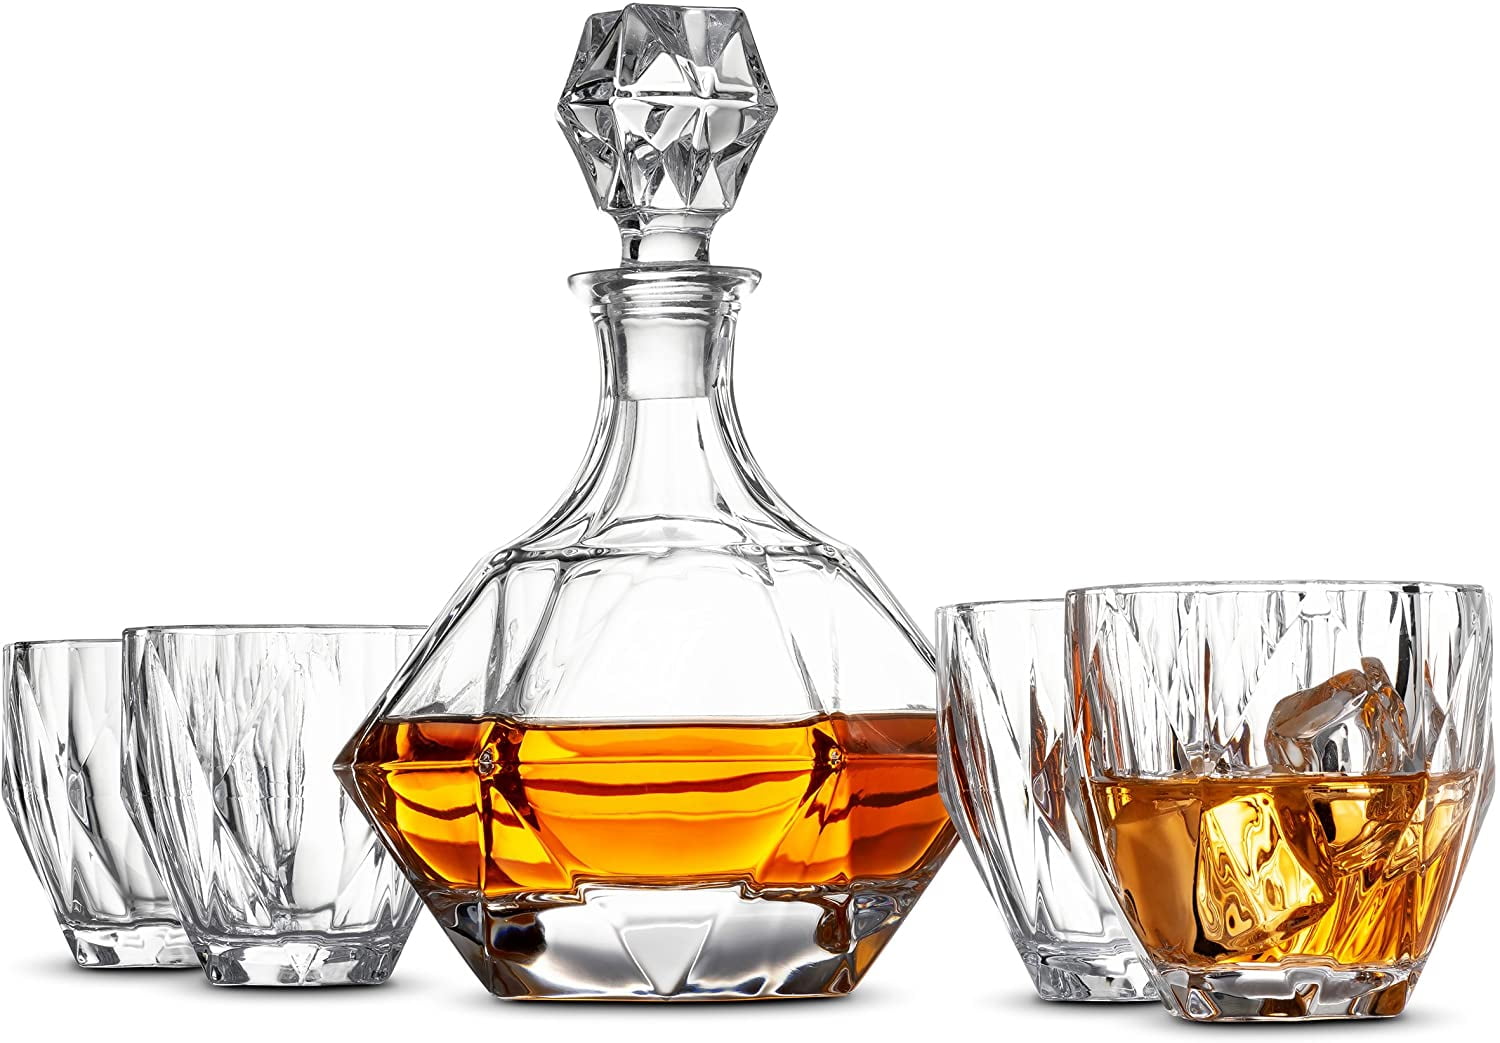 Perfect Whiskey Decanter Set for Scotch Bourbon With Magnetic Gift Box High-end European Style Whisky Decanter Set Exquisite Diamond Design Wine Decanter Carafe 4 Whisky Glasses Tumbler Set